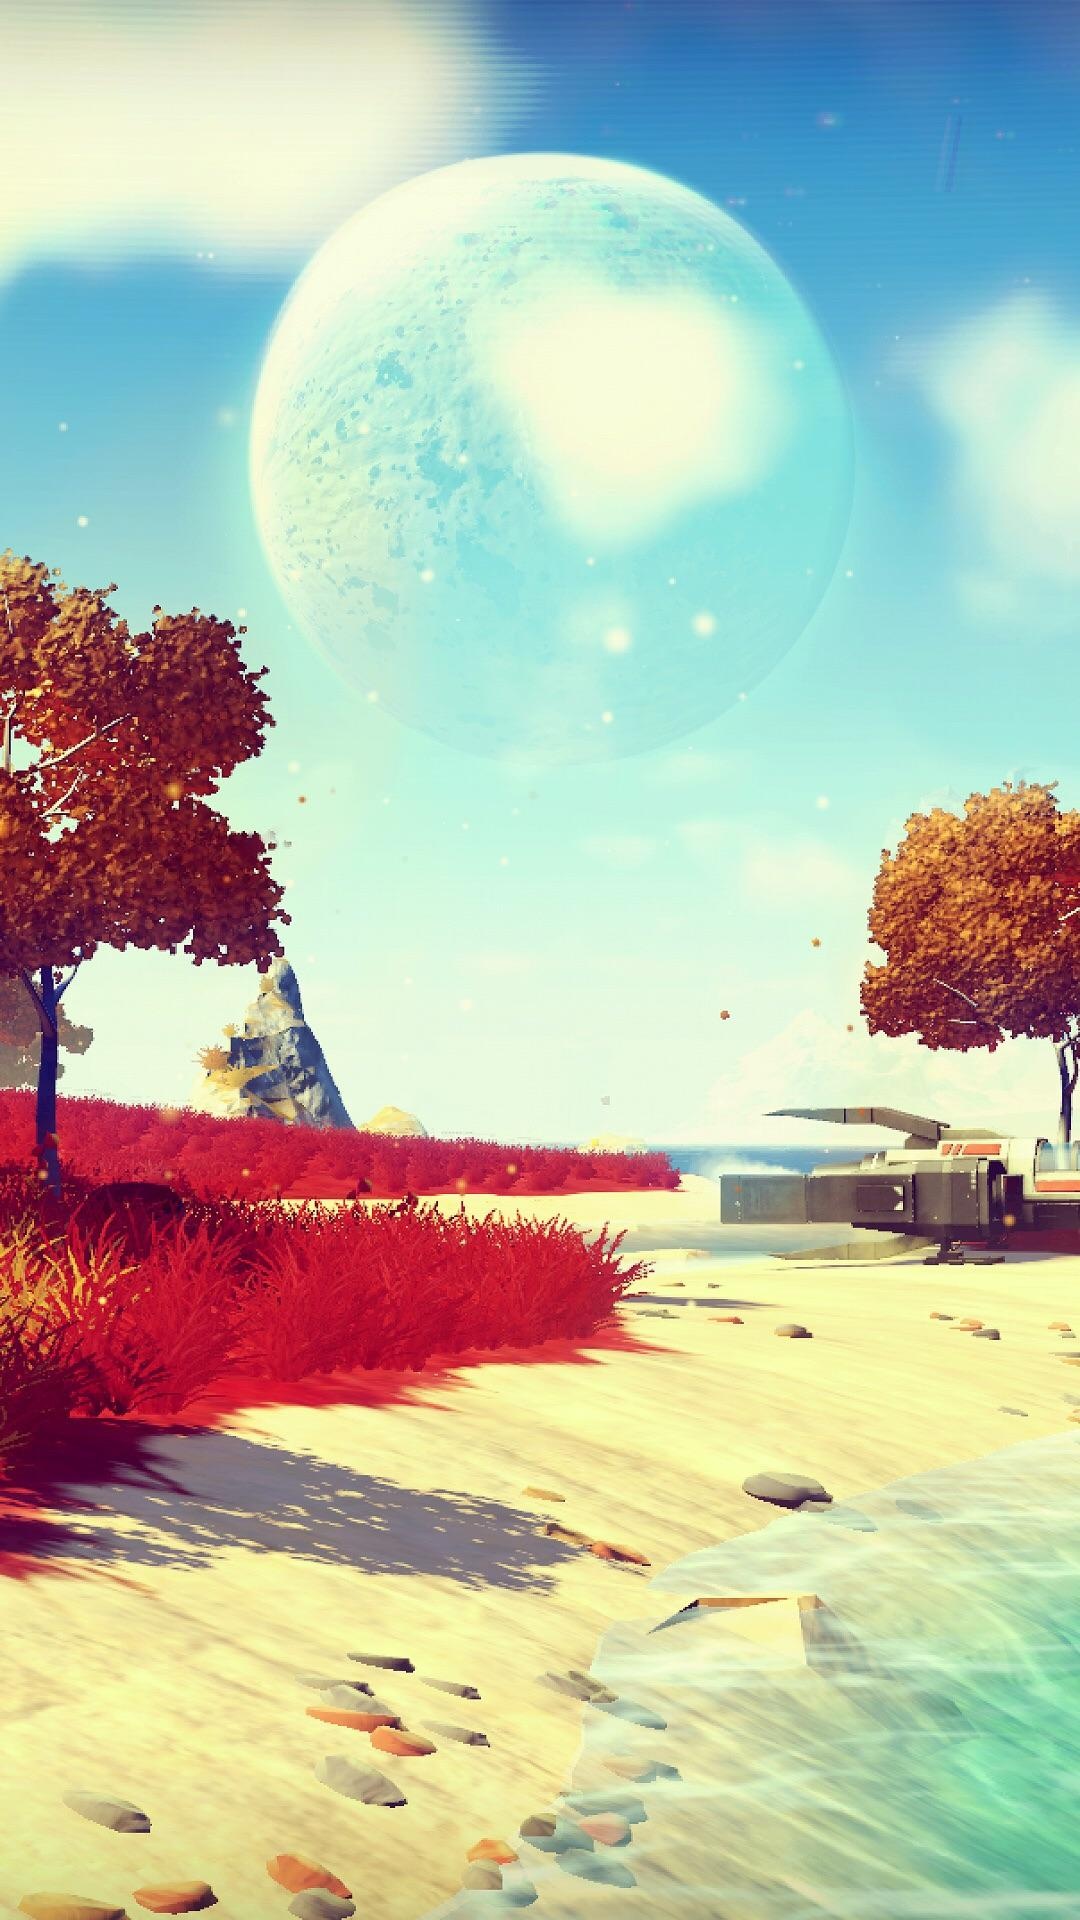 Phone wallpapers for No Man's Sky, Stunning mobile backgrounds, HD gaming imagery, Captivating visuals, 1080x1920 Full HD Phone